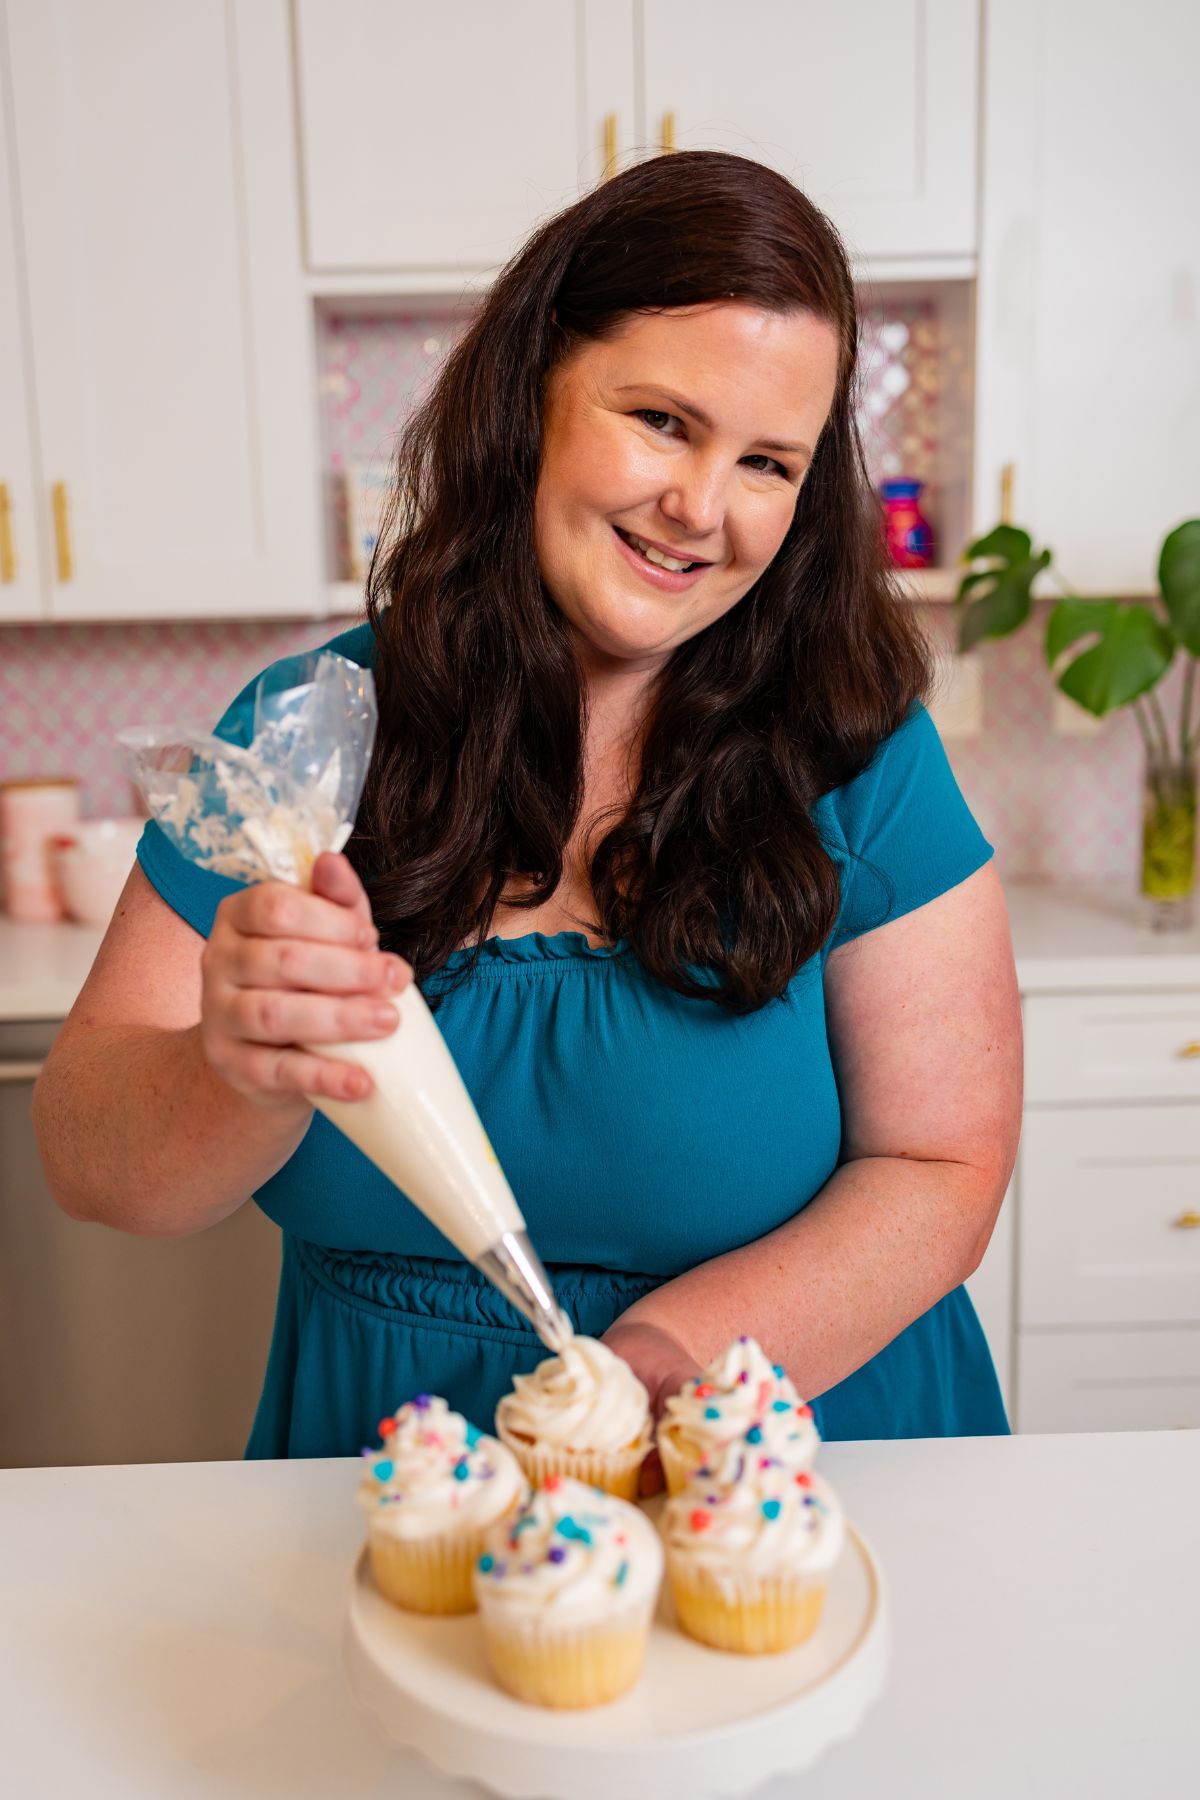 Mandy the creator of Semi Homemade Kitchen piping vanilla frosting onto cupcakes.